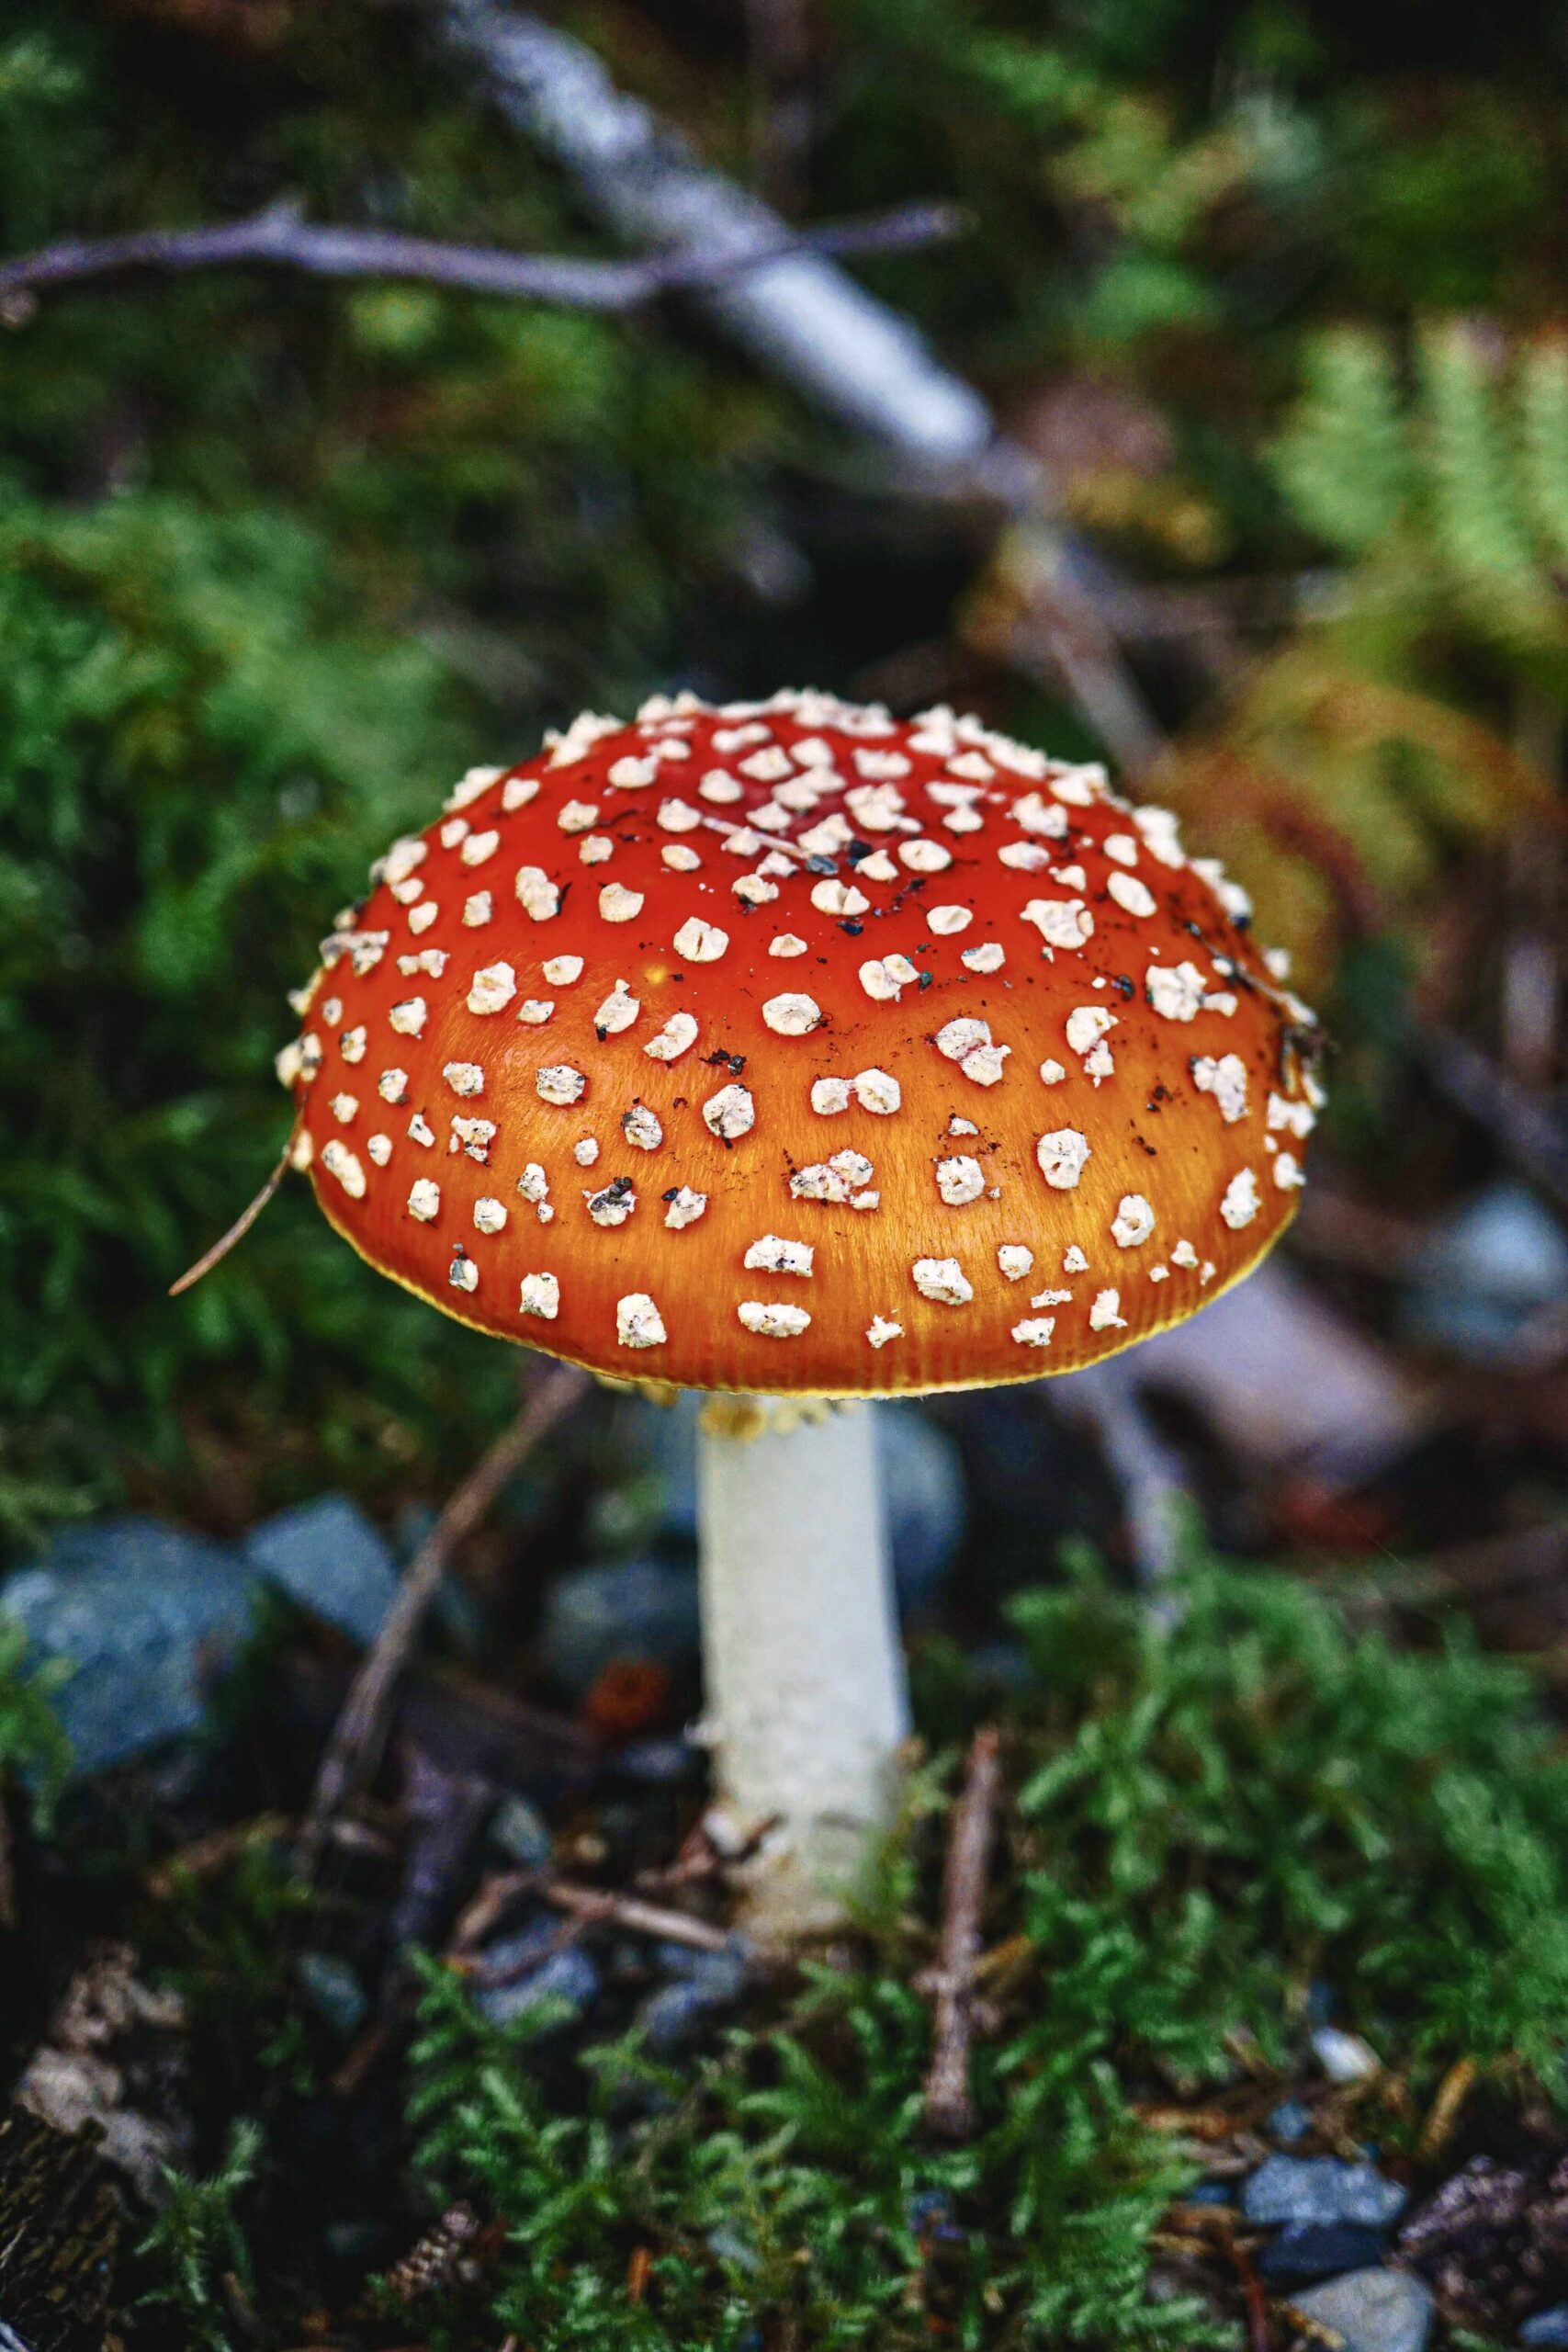 A brightly colored Amanita mushroom on Prince of Wales Island on Oct. 15. (Photo by Marti Crutcher)